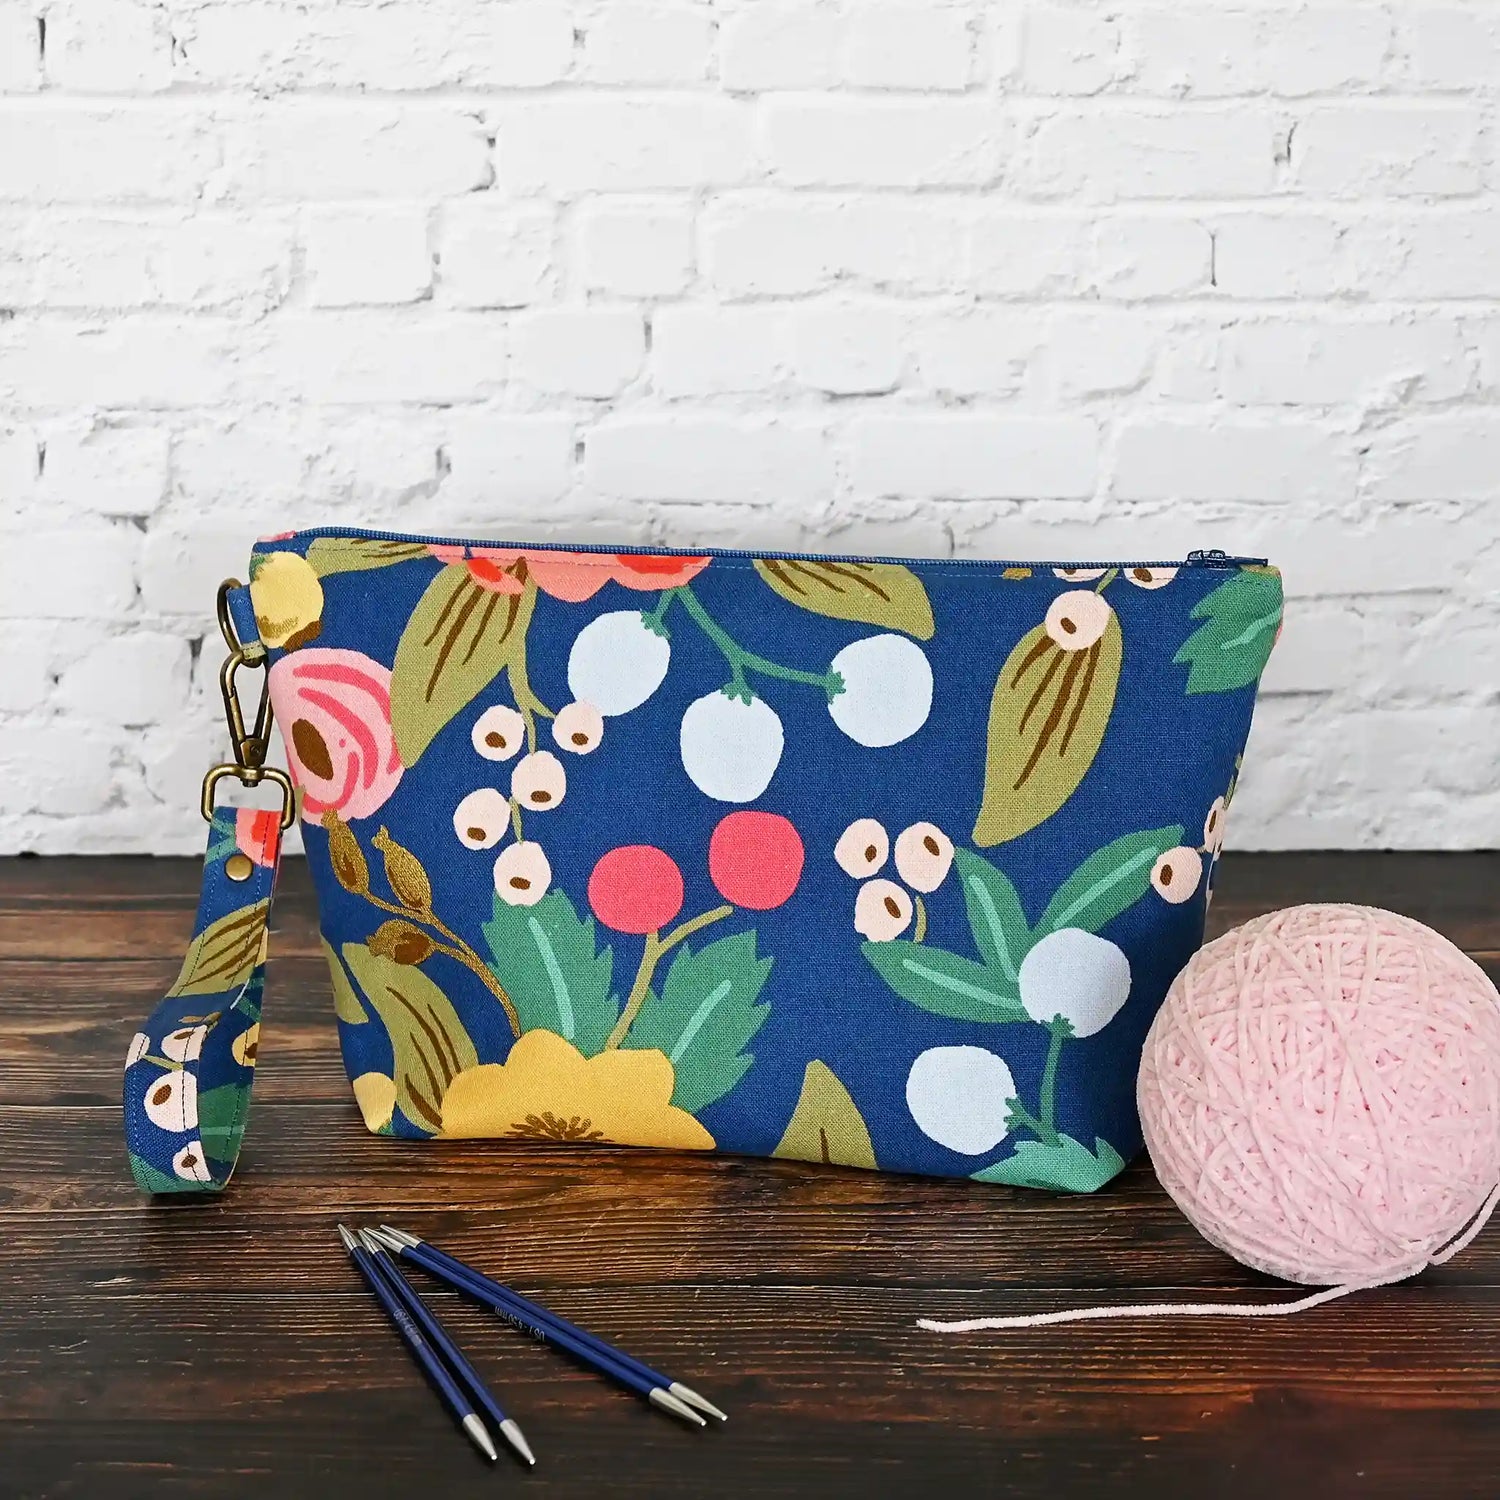 Blue floral canvas zippered pouch with removable wrist strap, lined in a pretty pink cotton.  Made with fabric from Rifle Paper Co and Riley Blake.  Handmade in Canada by Yellow Petal Handmade.